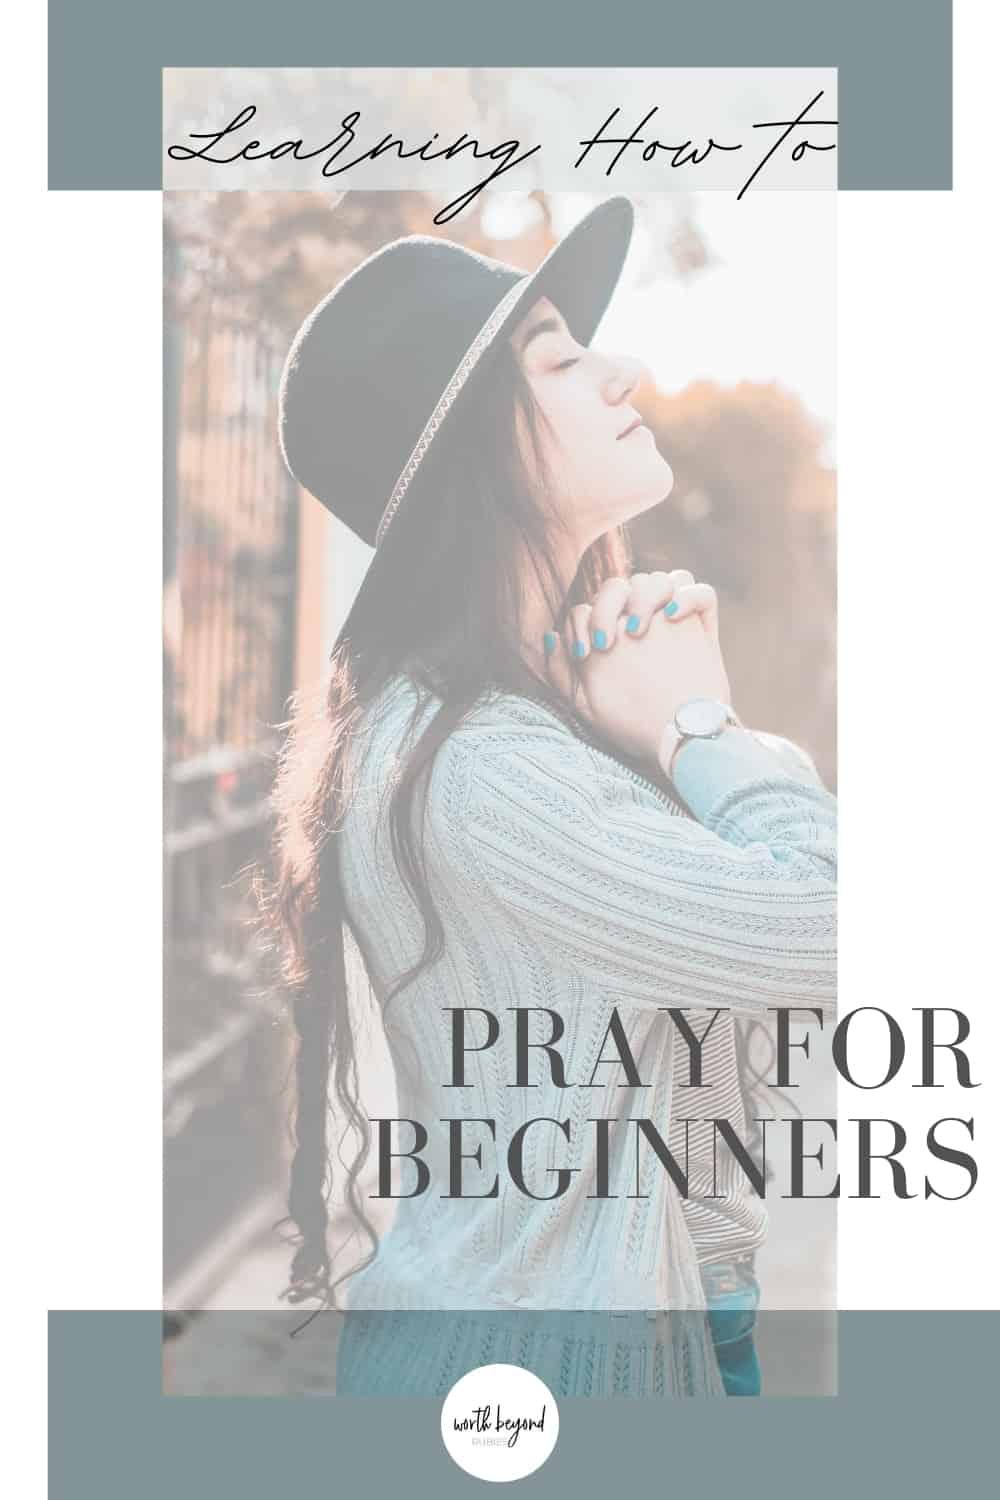 a woman praying and text that says Learning How to Pray for Beginners